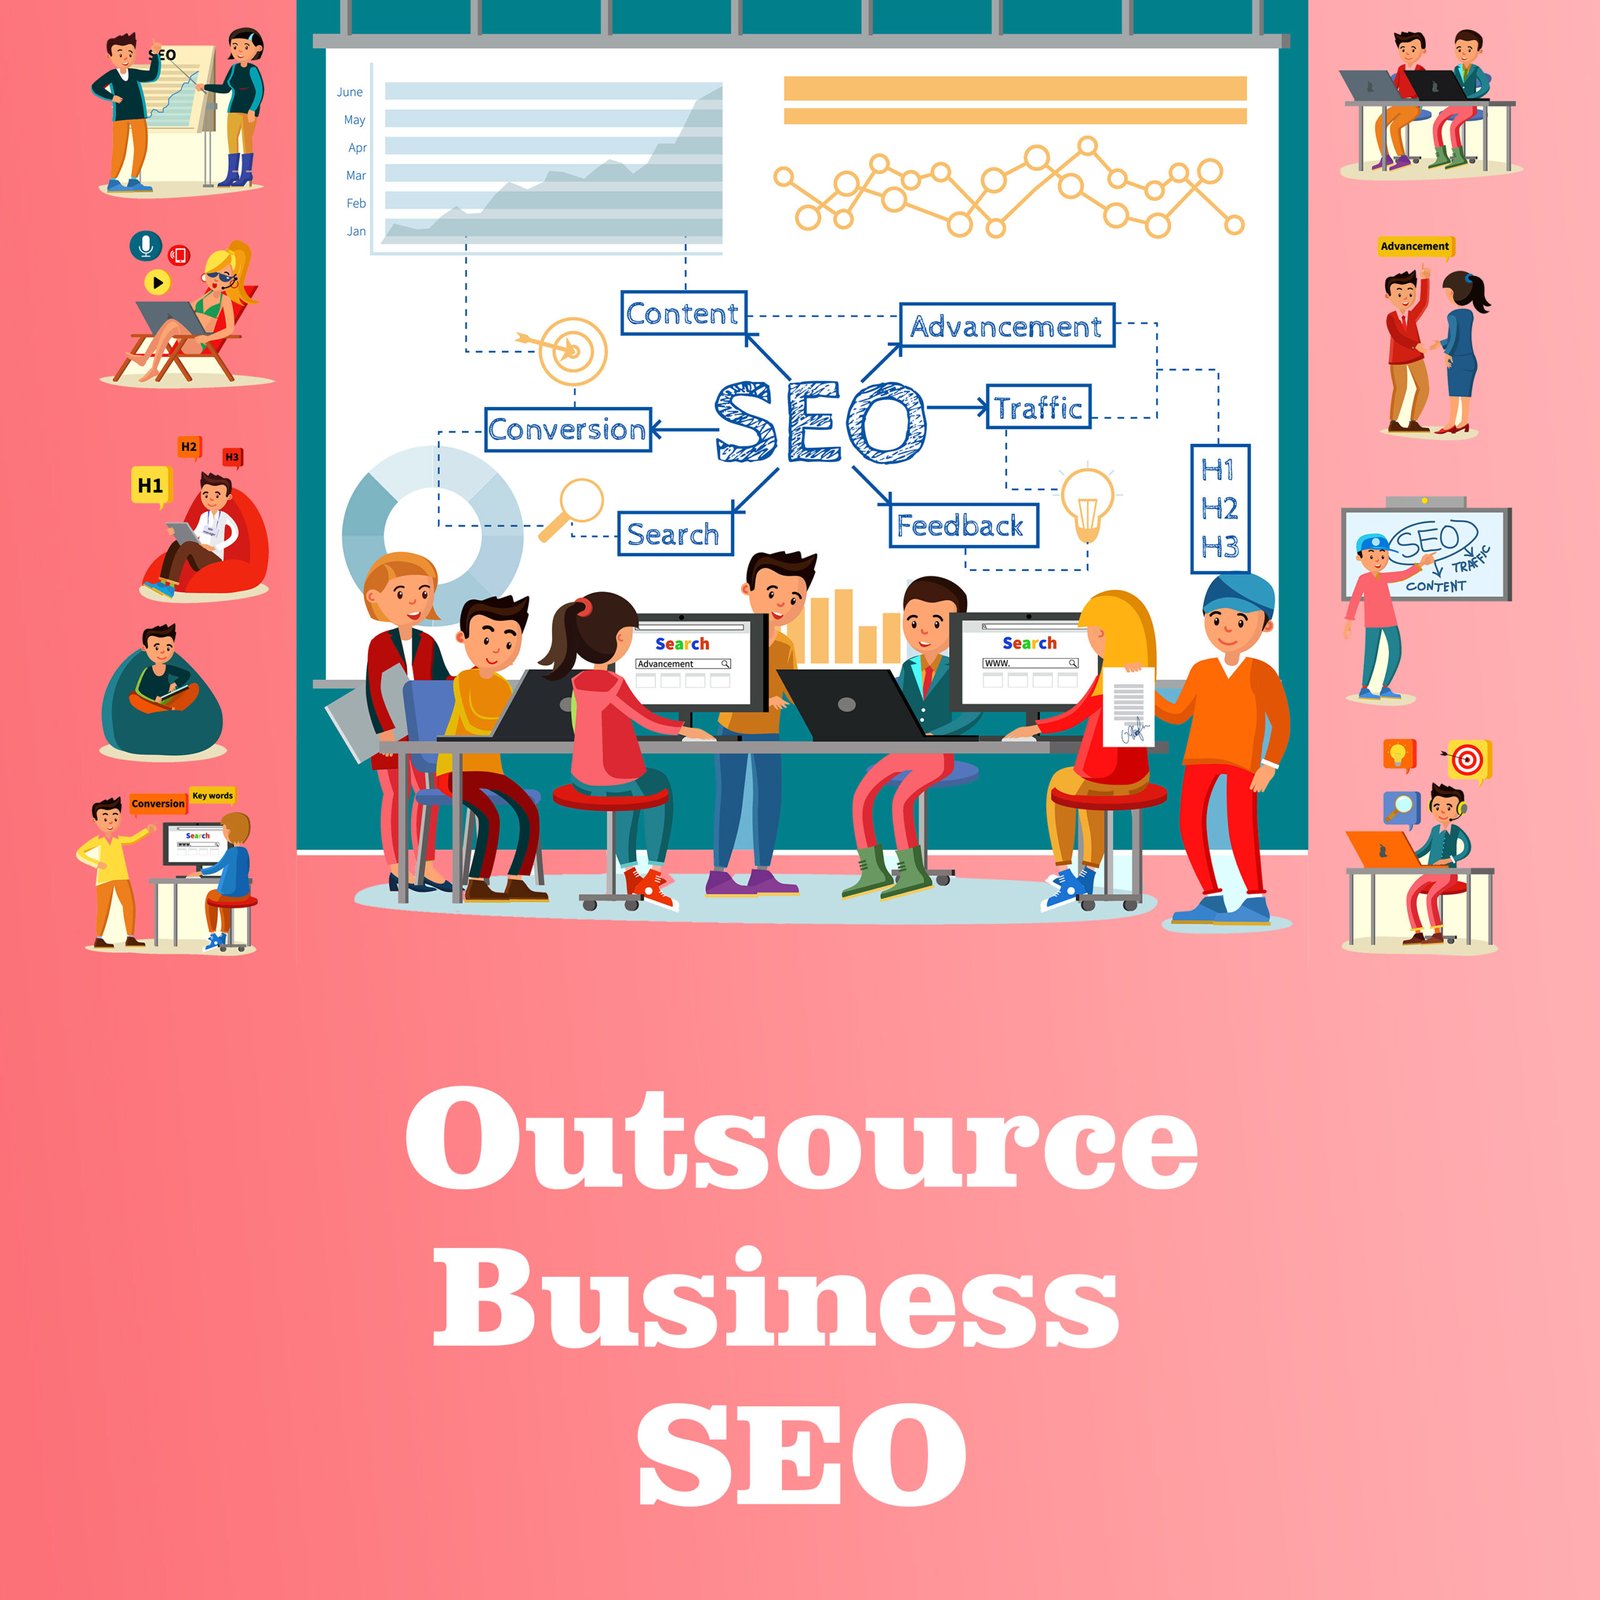 Outsource Business seo